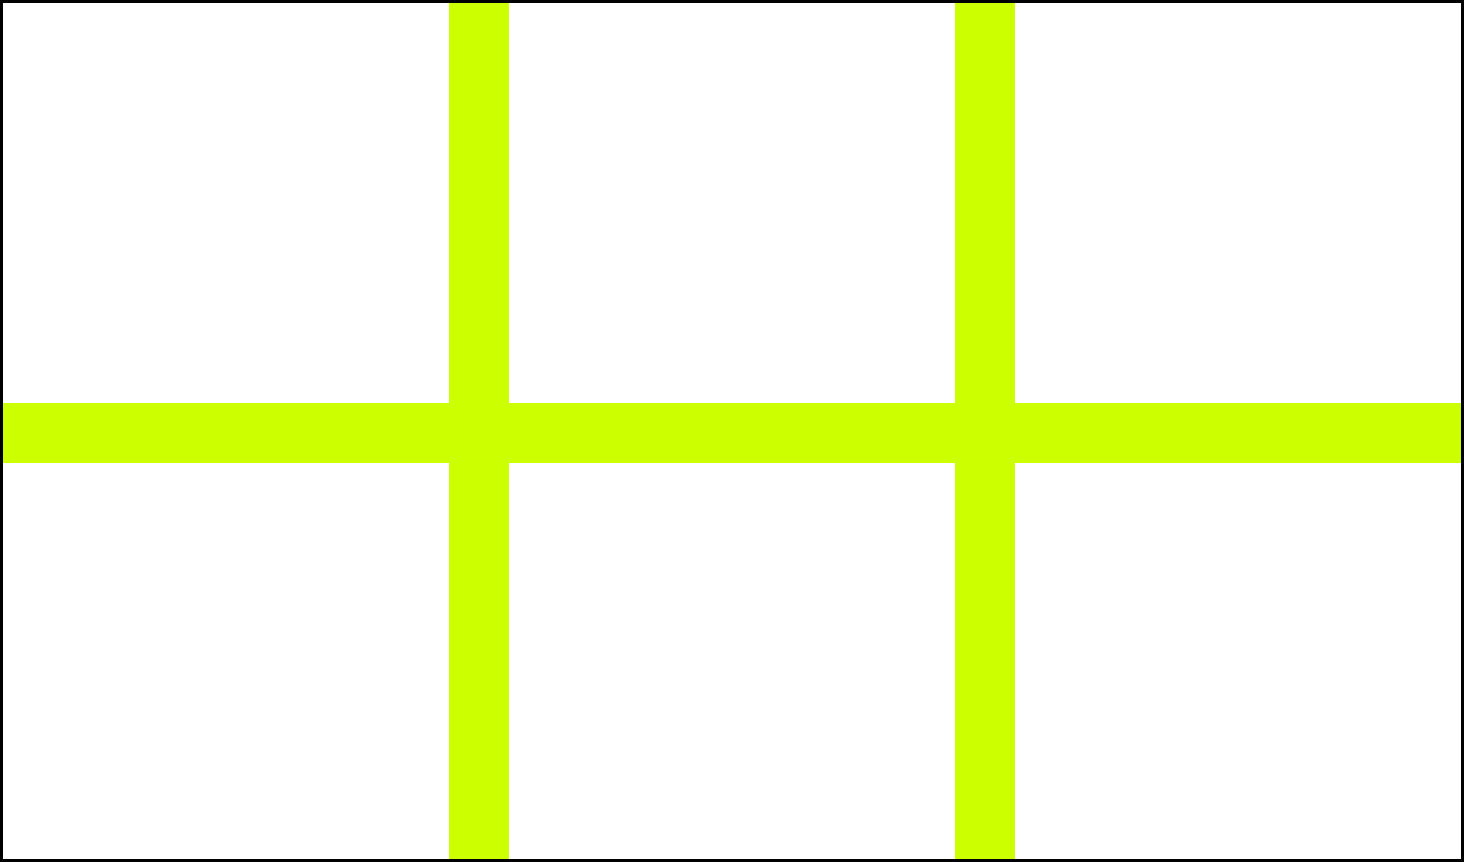 Grid Example